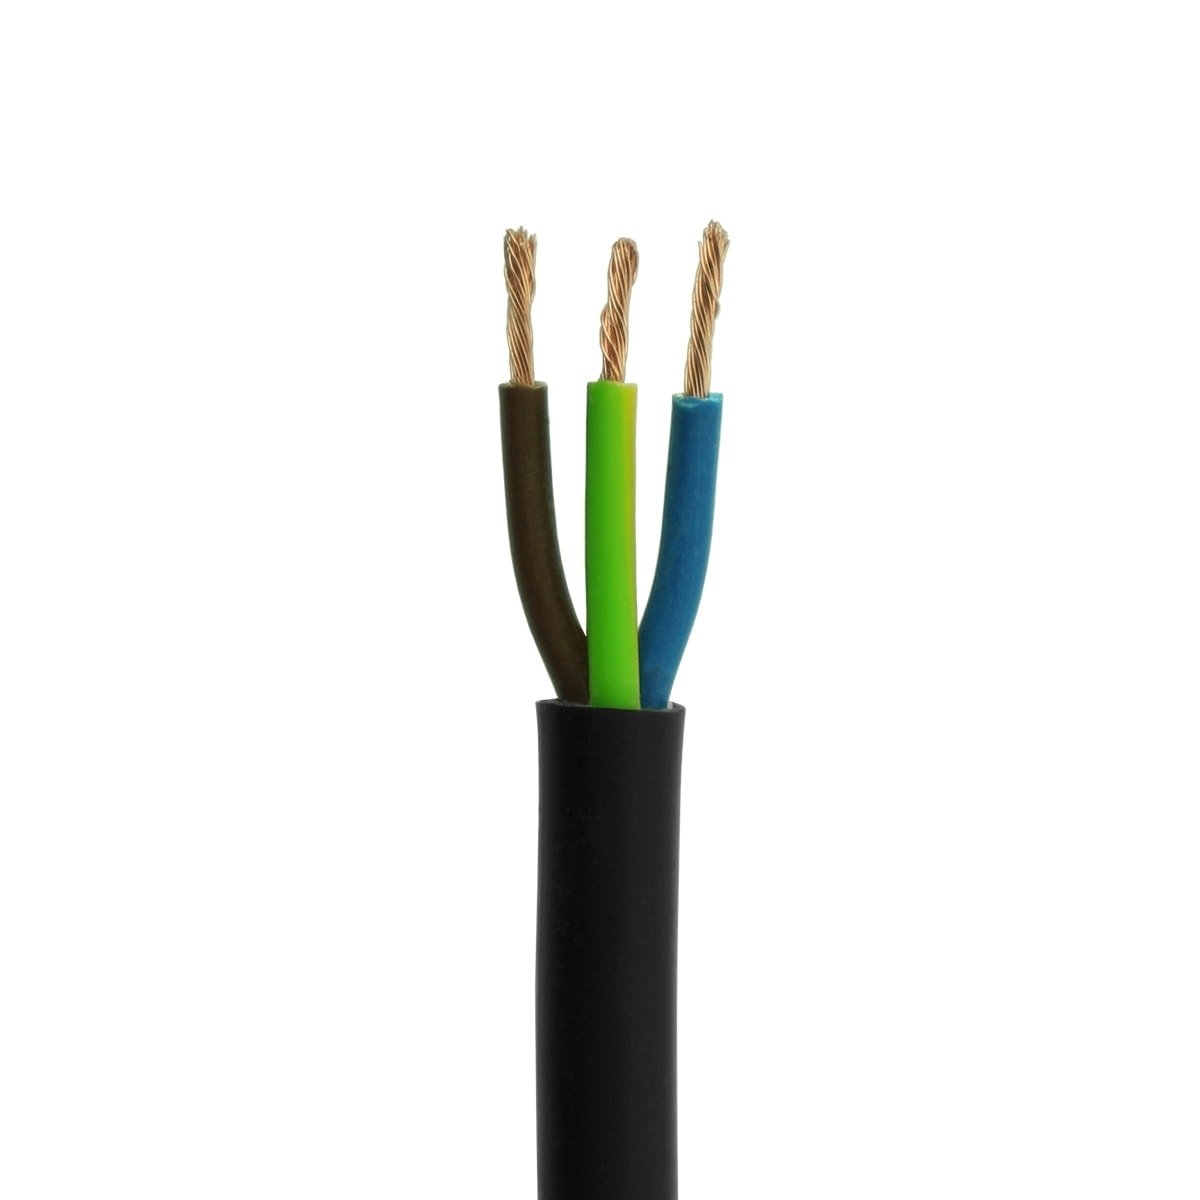 Power cable 3 x 0.75 mm2 VMVL - 5 m